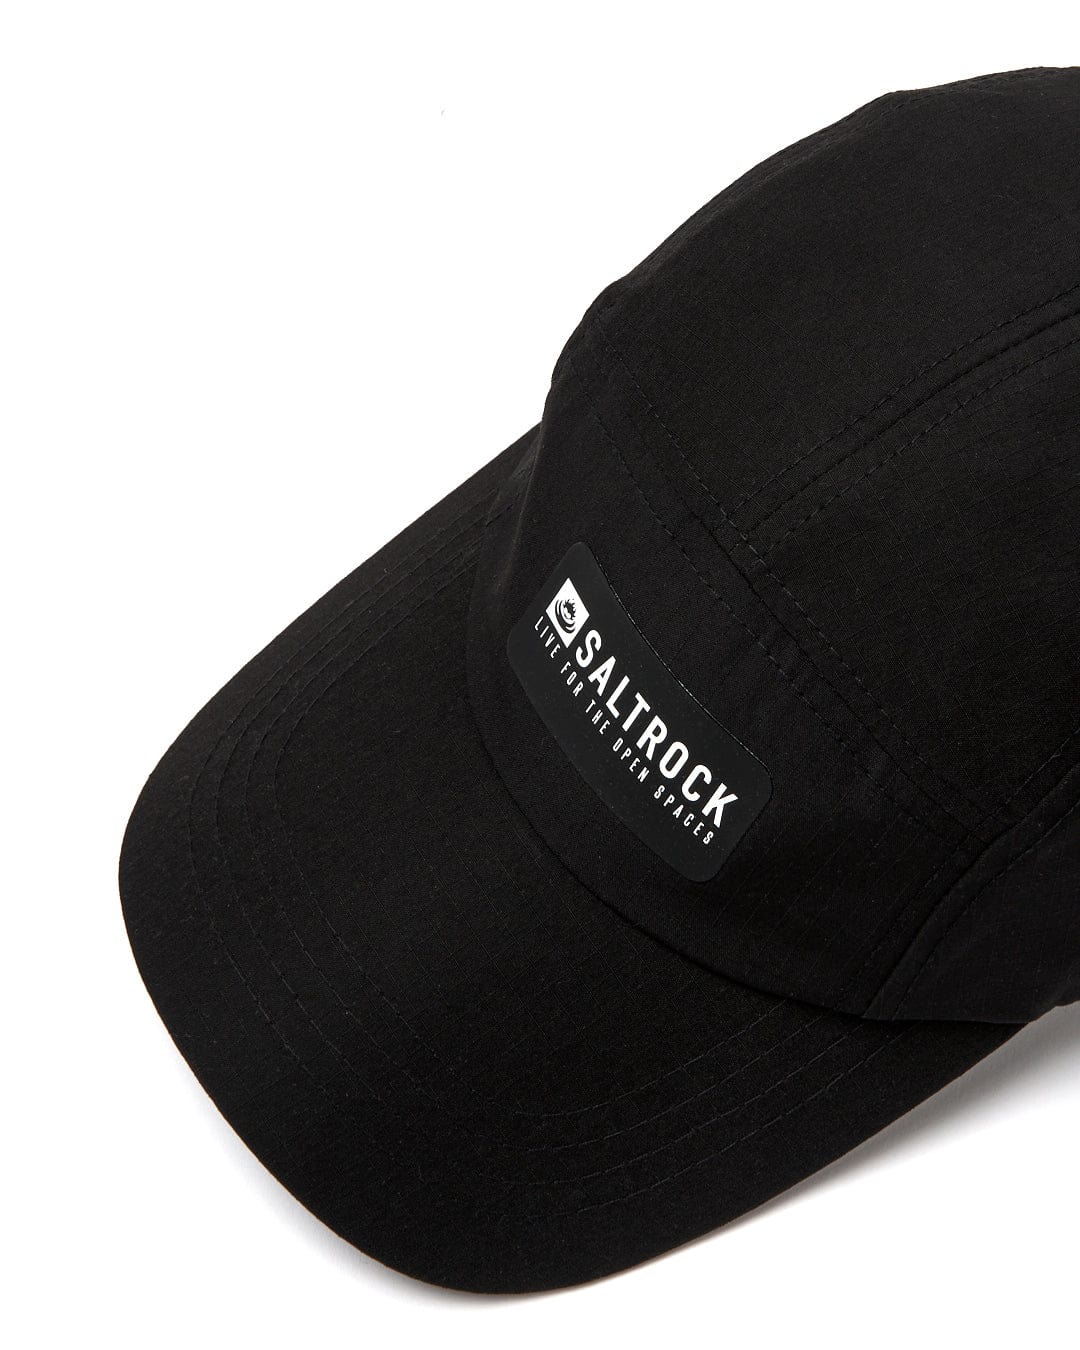 A Saltrock Gaitor 5 Panel UPF Cap in black with an adjustable strap and a white logo.